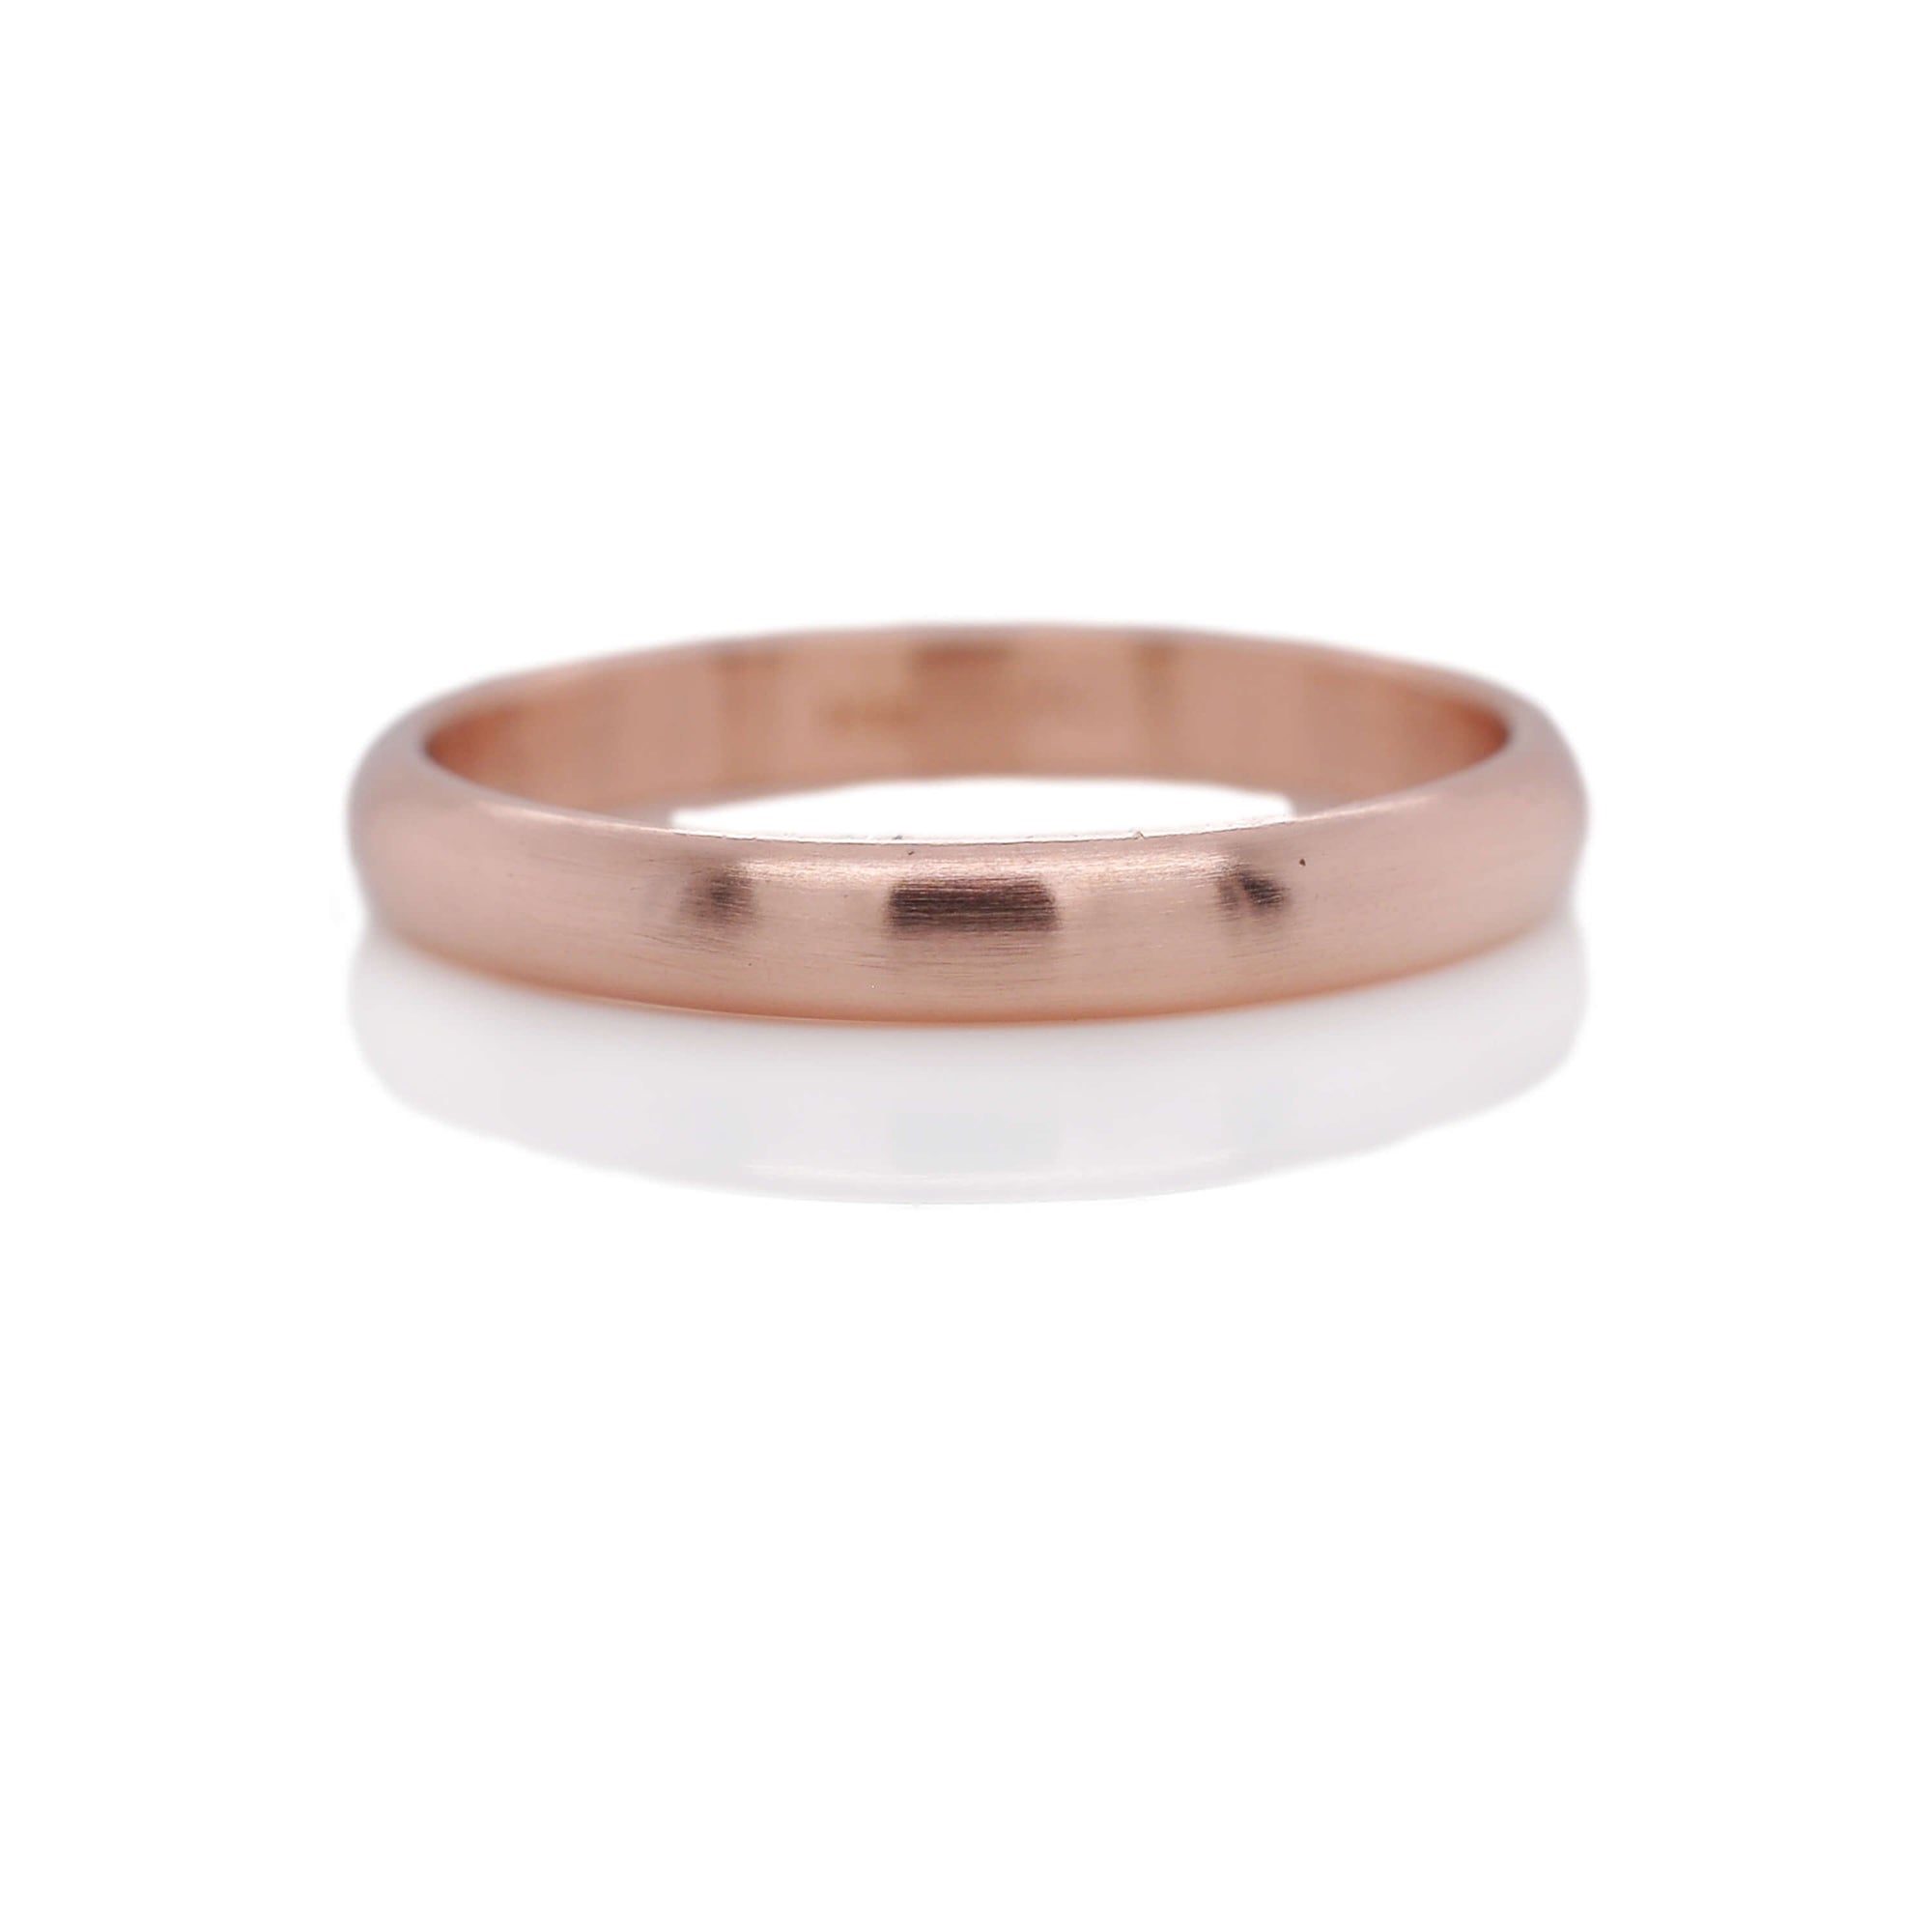 Low dome band in 14k rose gold. Handmade with recycled metal.